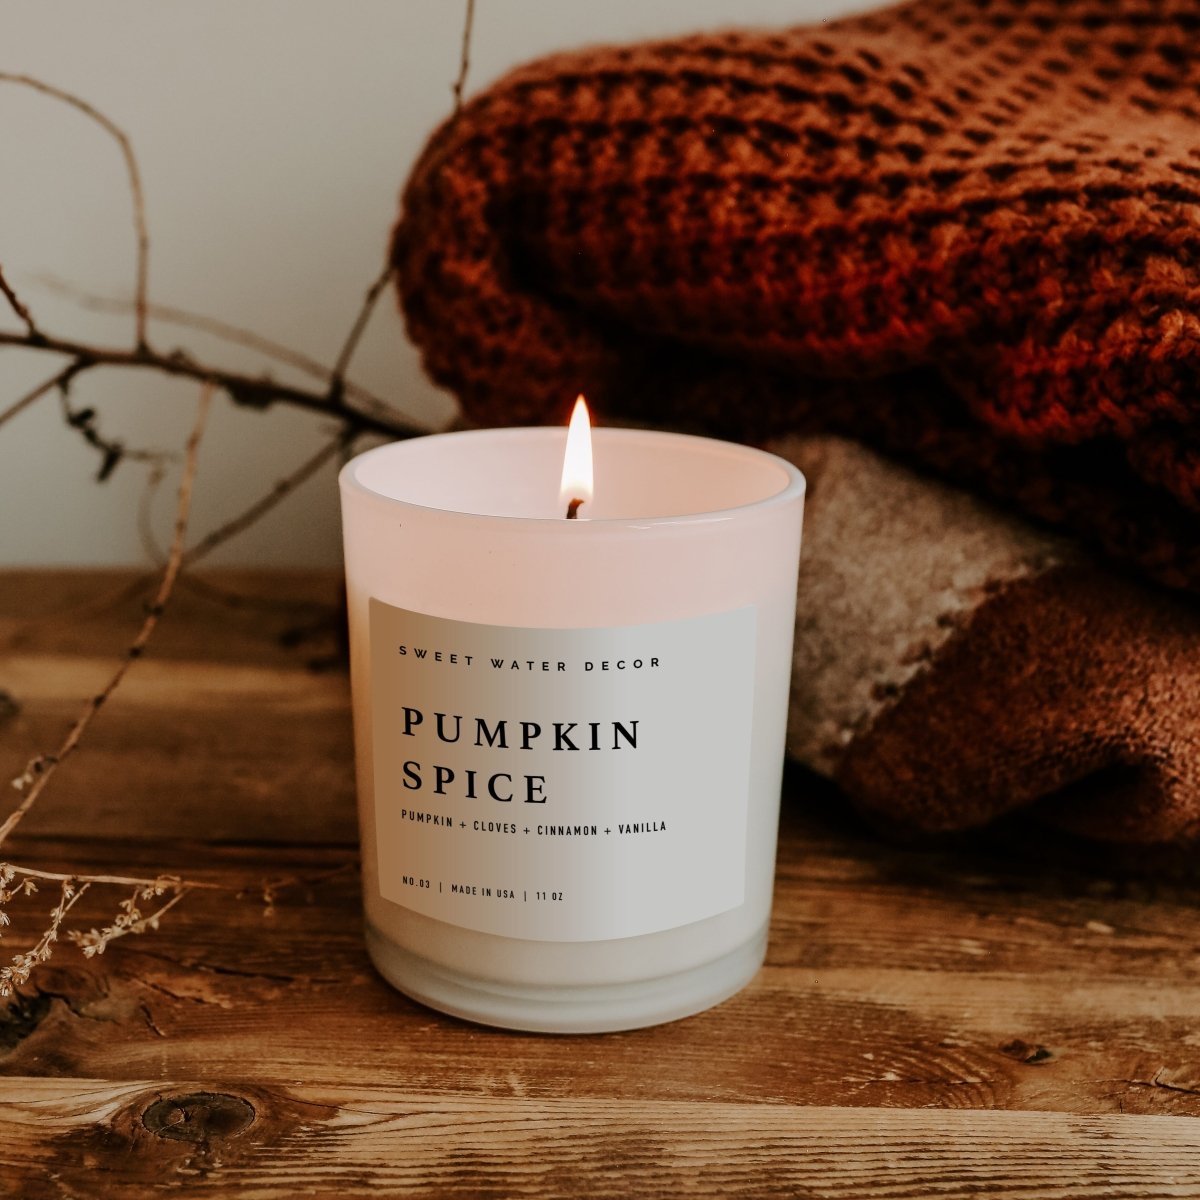 Sweet Water Decor Pumpkin Spice Soy Candle - White Jar - 11 oz - lily & onyx